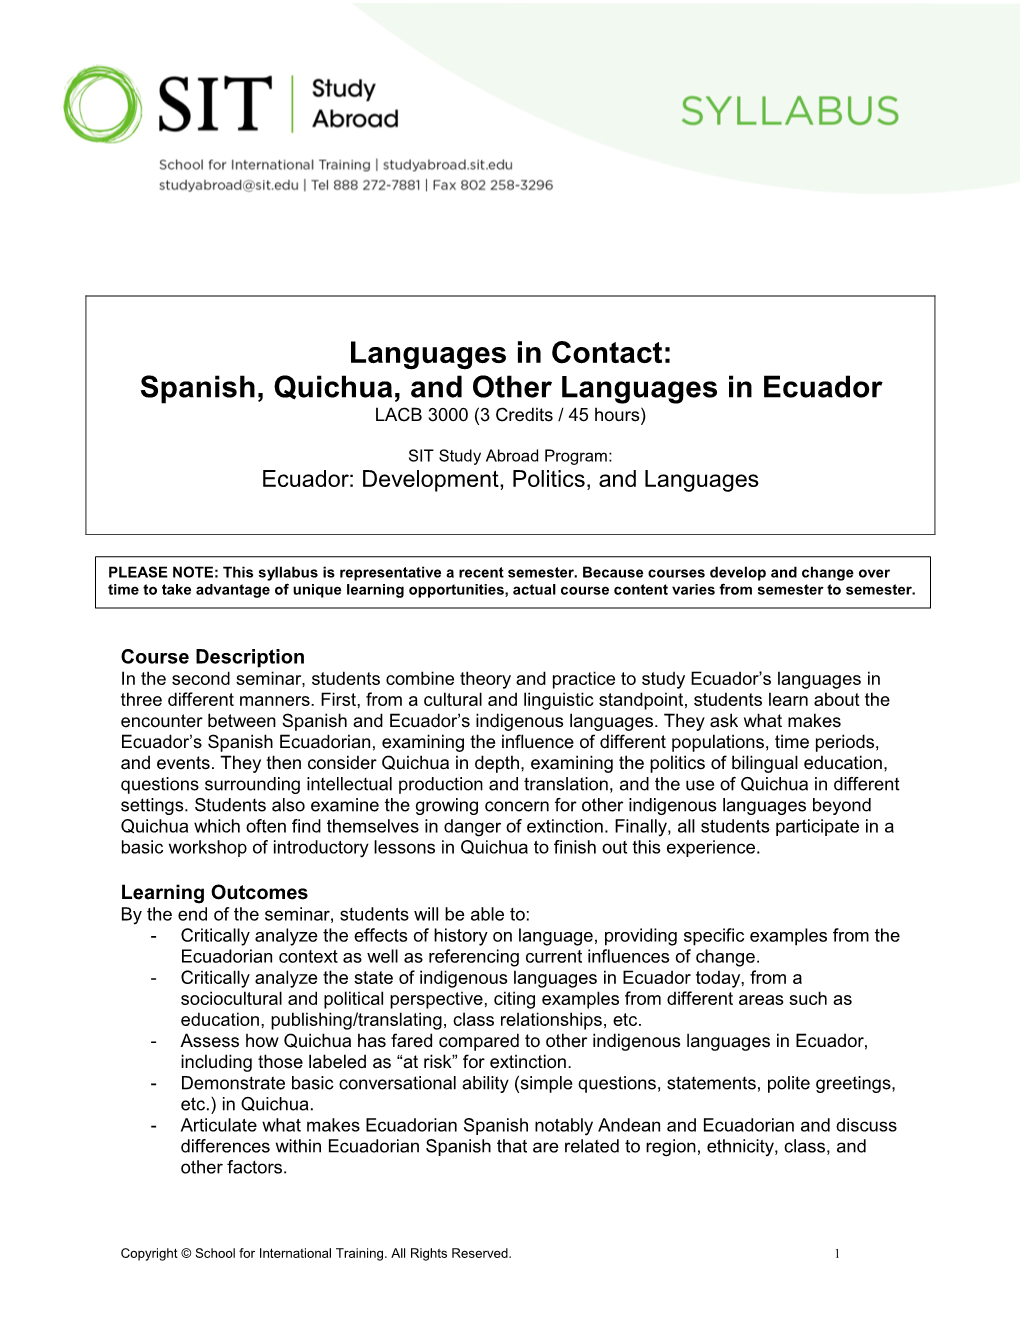 Spanish, Quichua, and Other Languages in Ecuador LACB 3000 (3 Credits / 45 Hours)